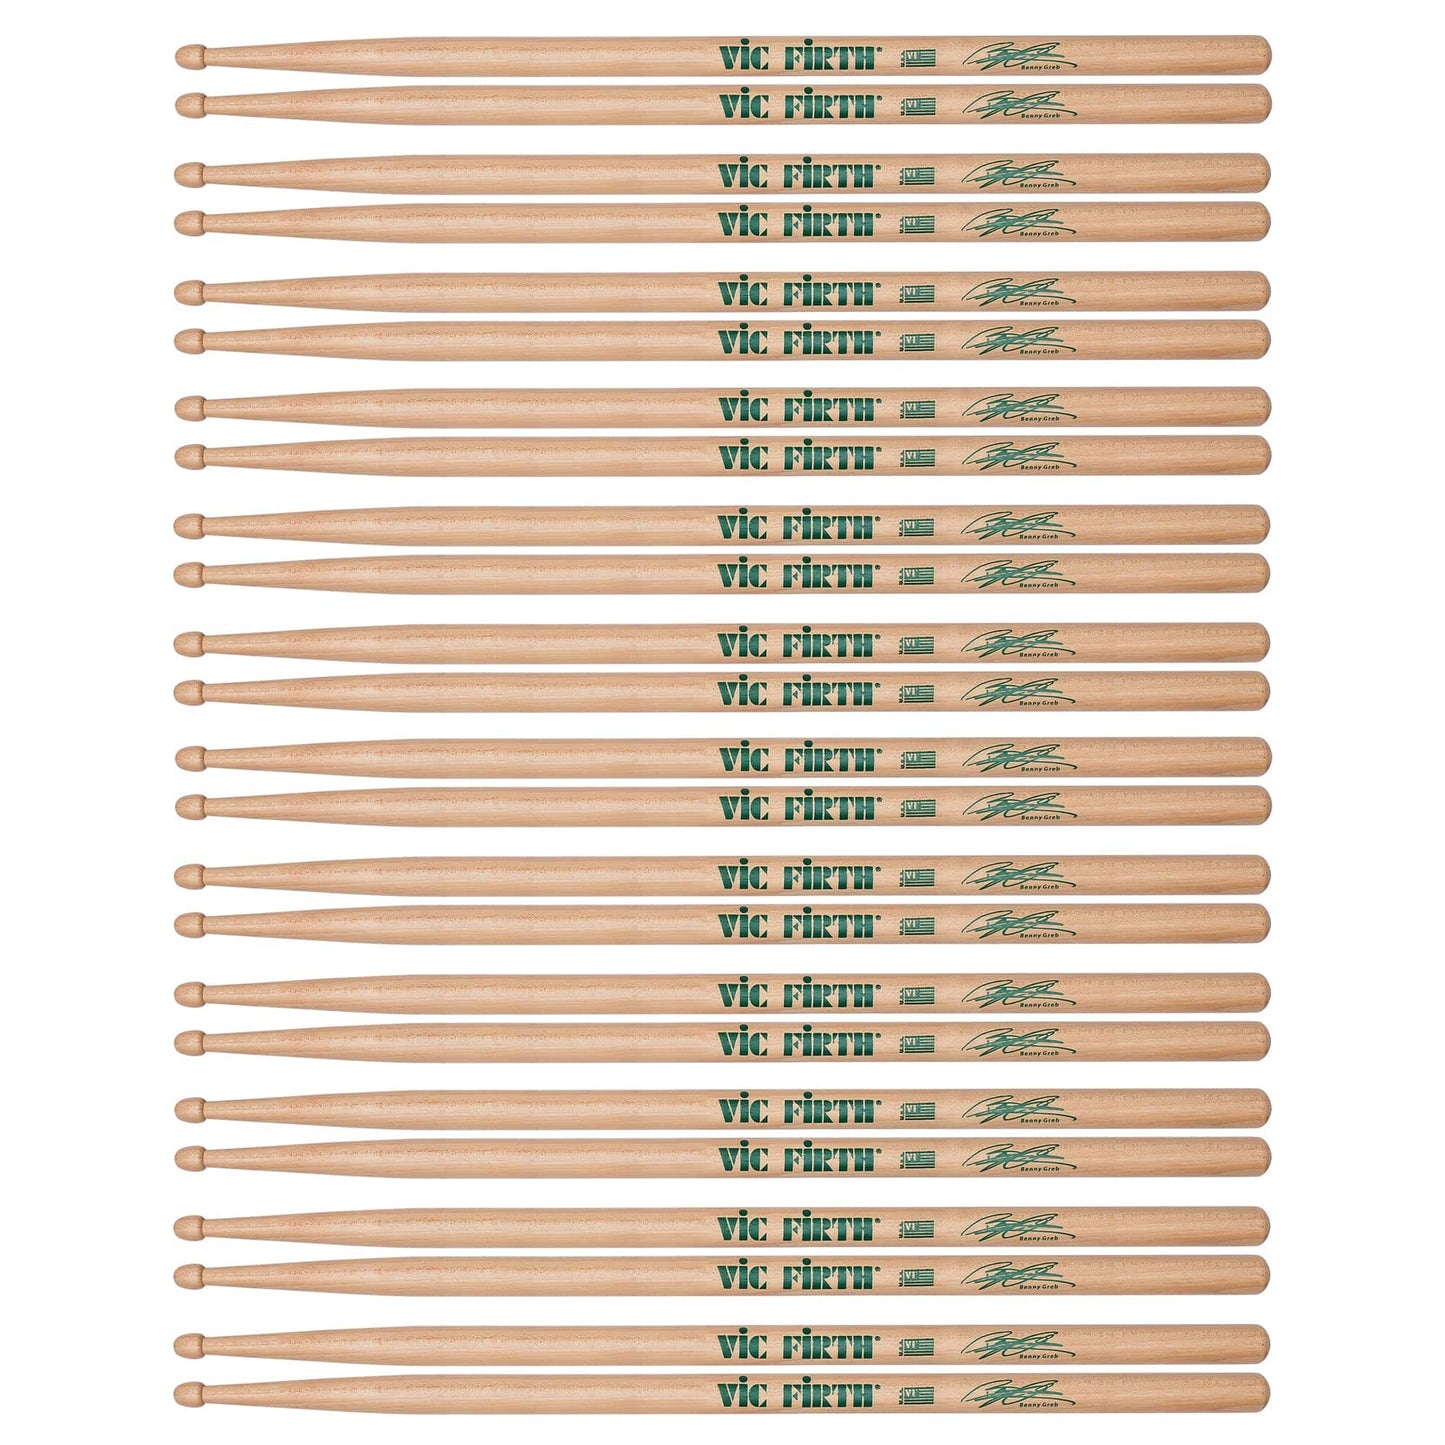 Vic Firth Benny Greb Signature Drum Sticks (12 Pair Bundle) Drums and Percussion / Parts and Accessories / Drum Sticks and Mallets